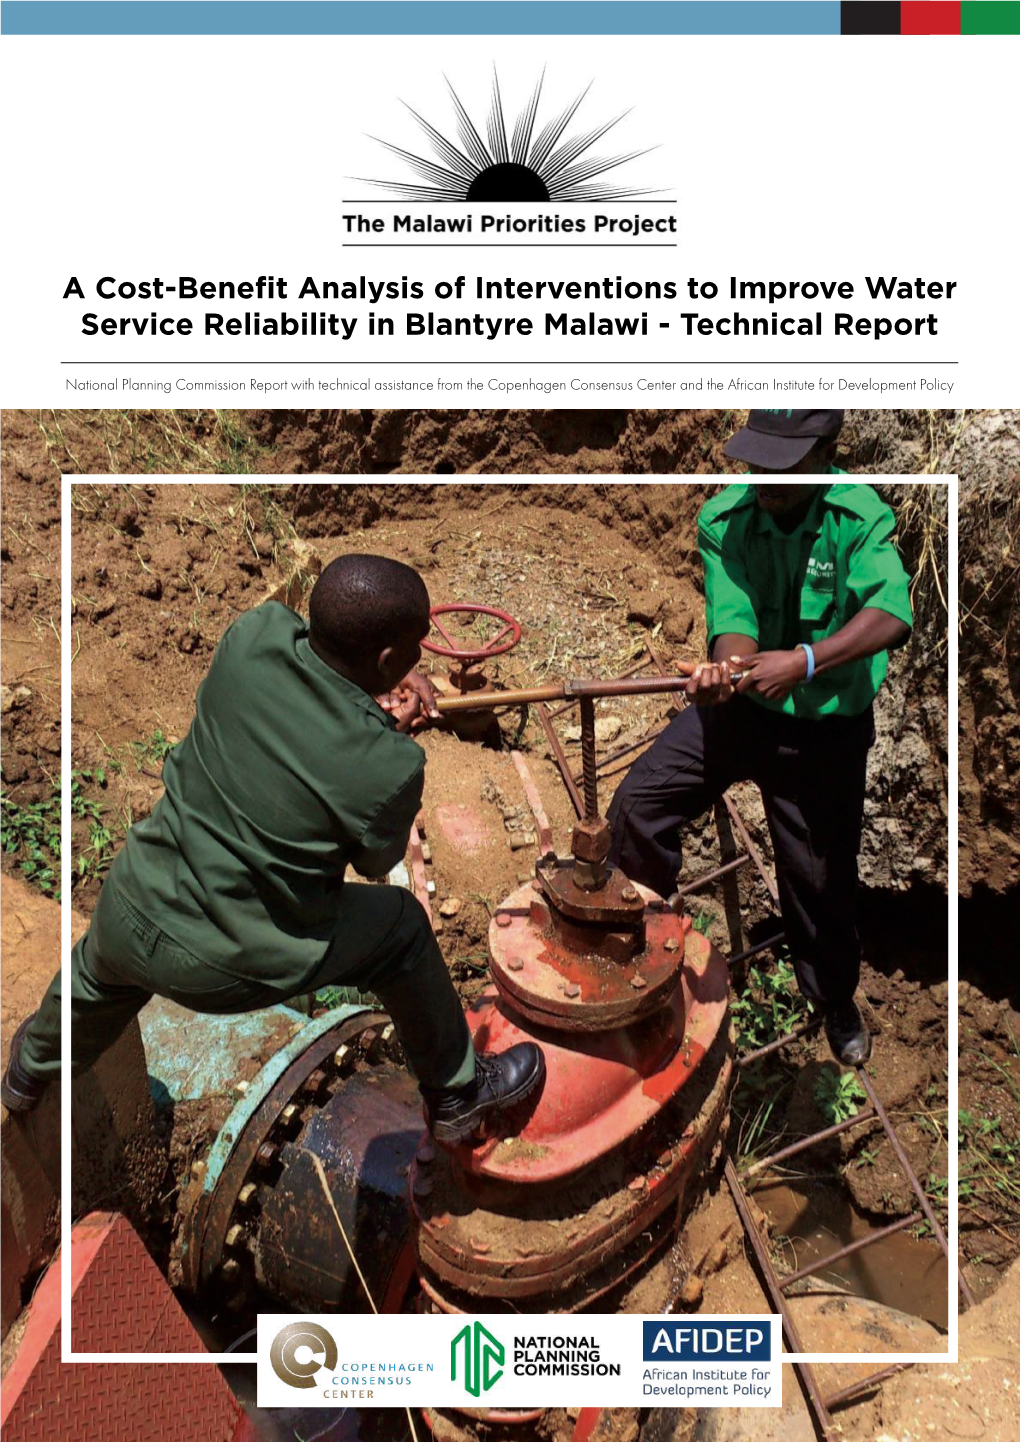 A Cost-Benefit Analysis of Interventions to Improve Water Service Reliability in Blantyre Malawi - Technical Report